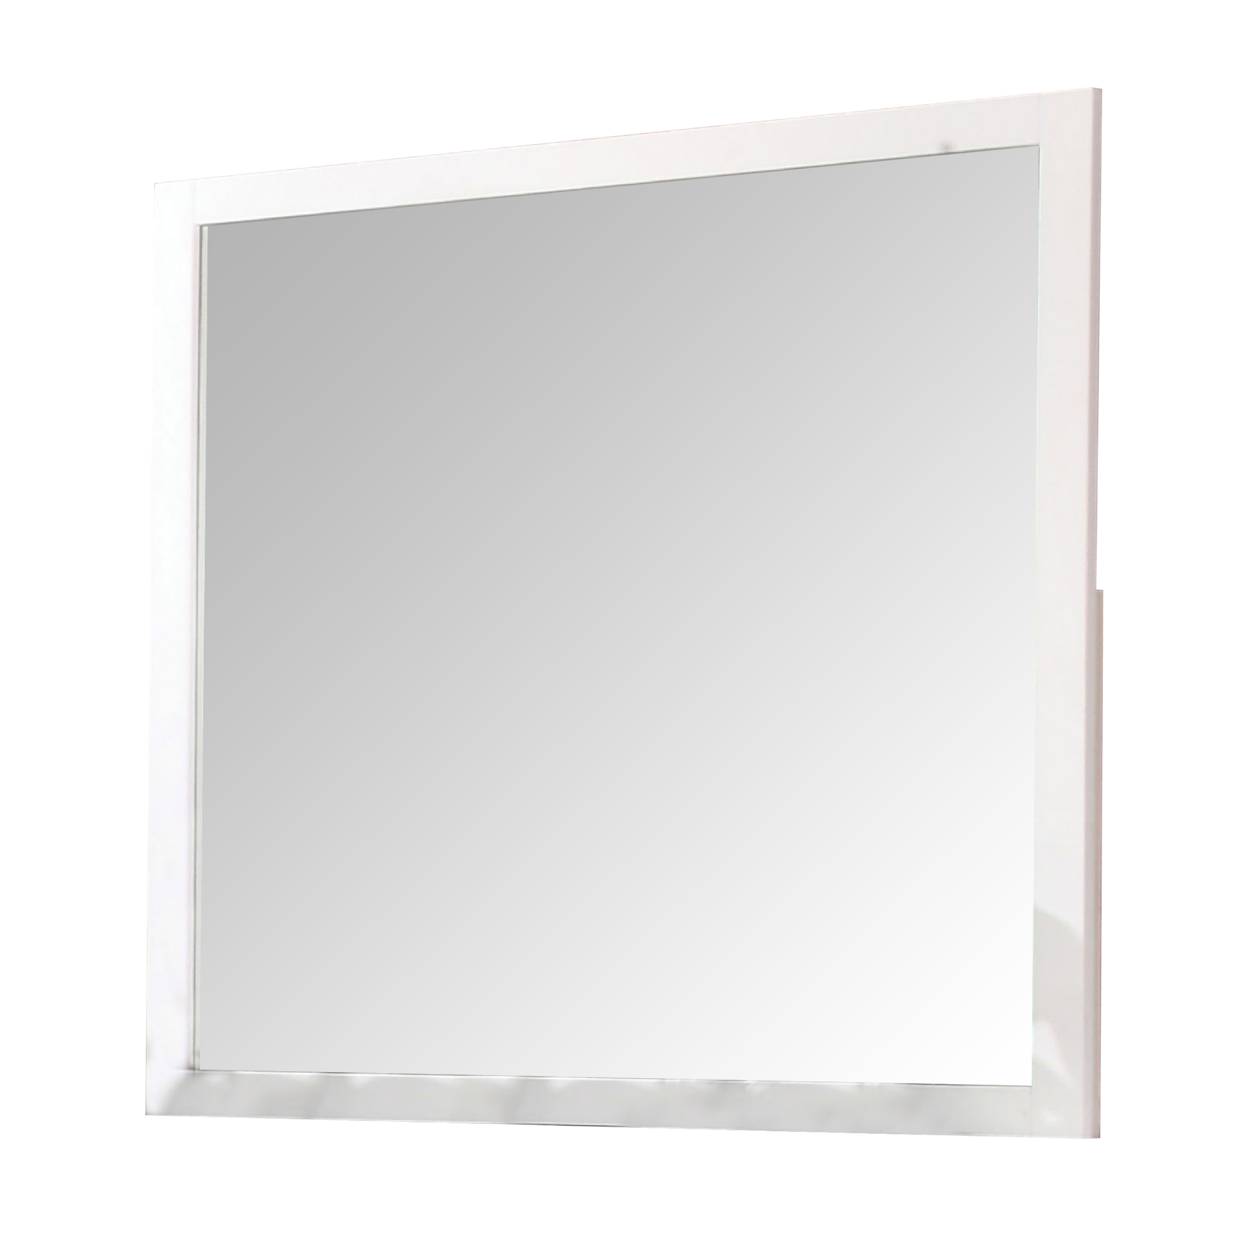 40 Inch Square Wall Mirror, Transitional, Solid Wood Frame, White- Saltoro Sherpi